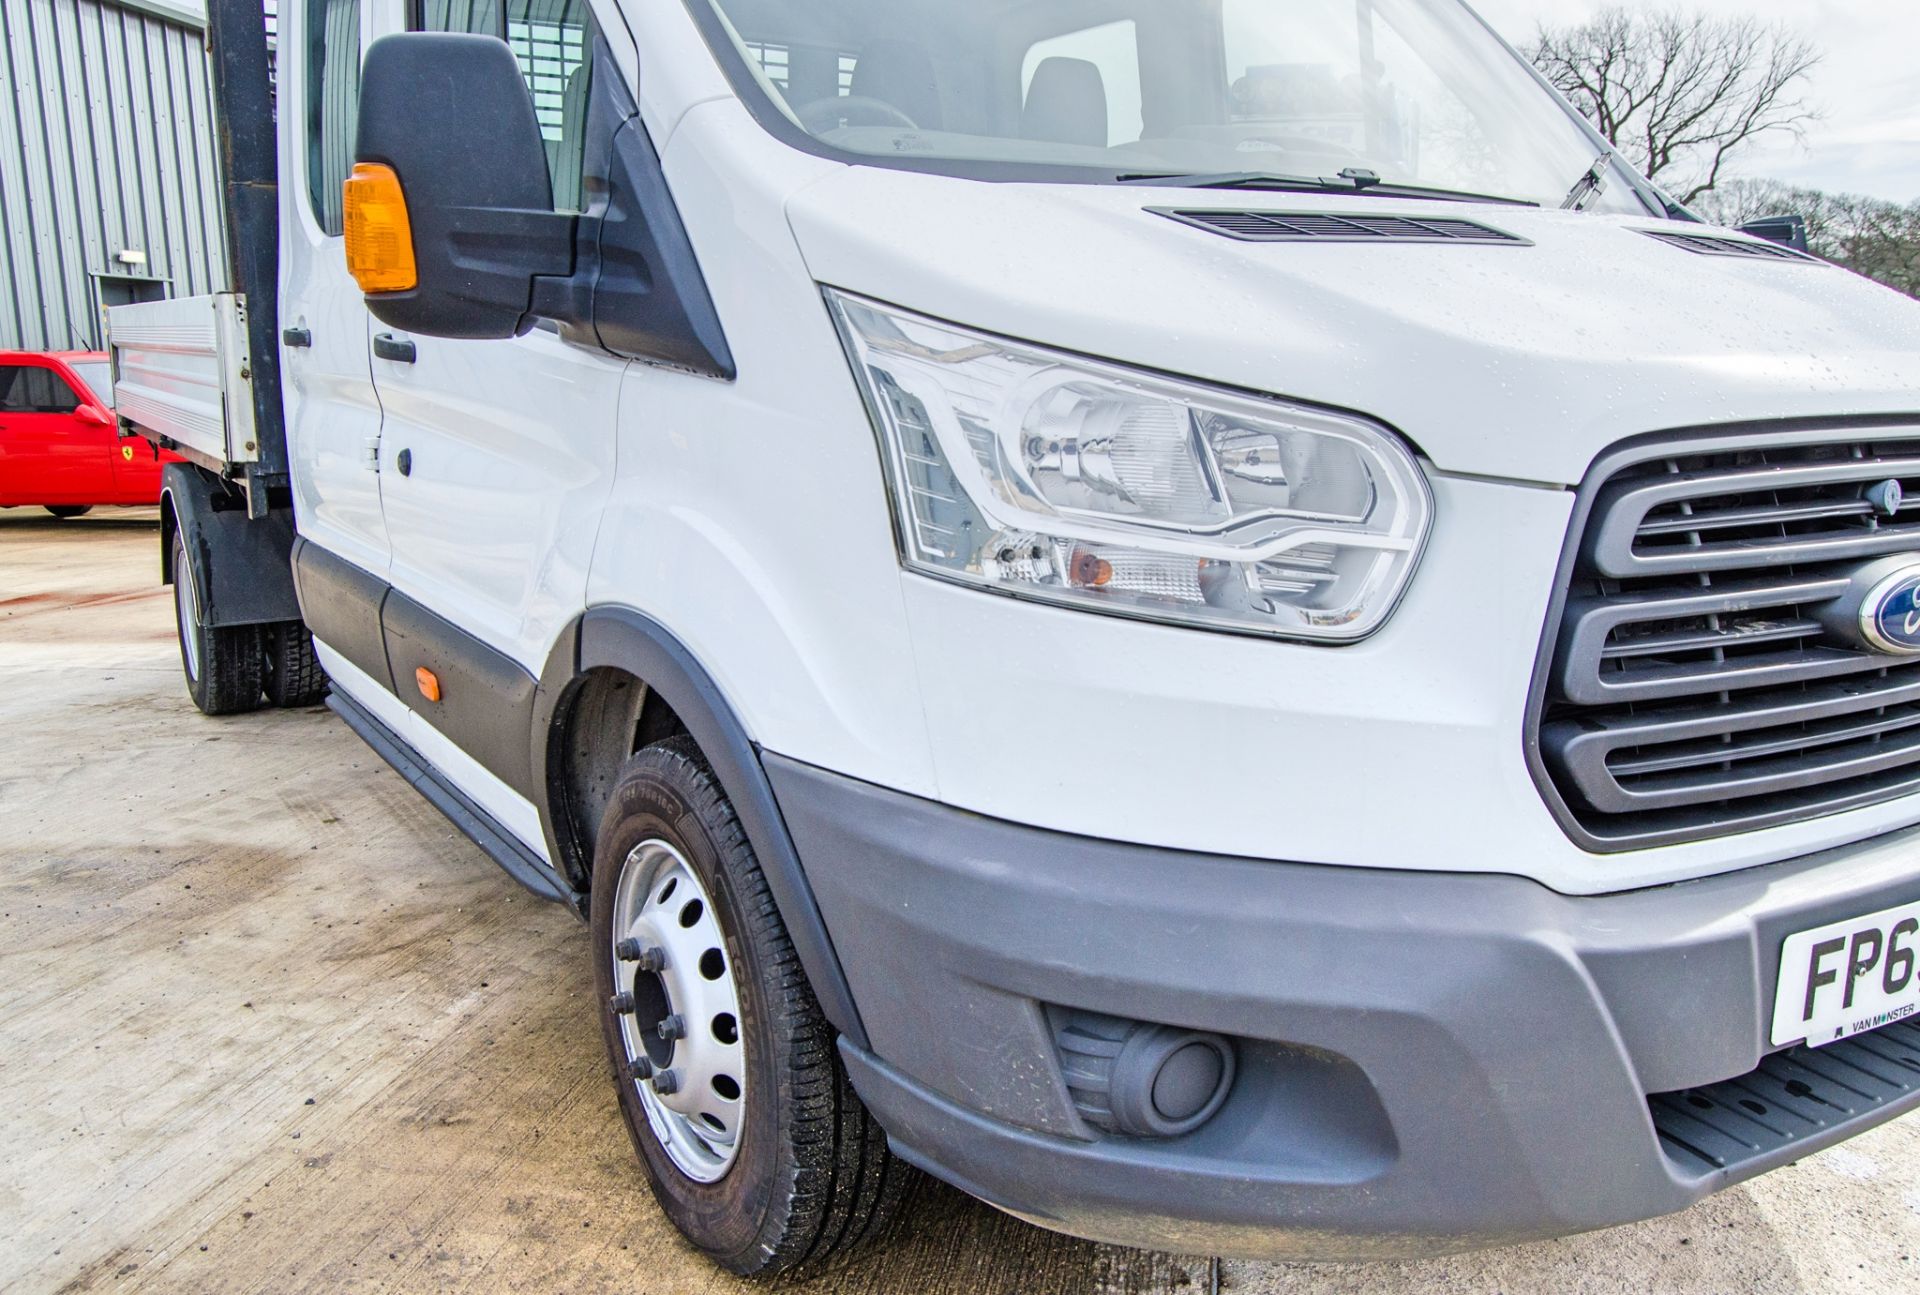 Ford Transit 350 2198cc 6 speed manual crew cab tipper  Registration Number: FP65 DHD Date of - Image 9 of 35